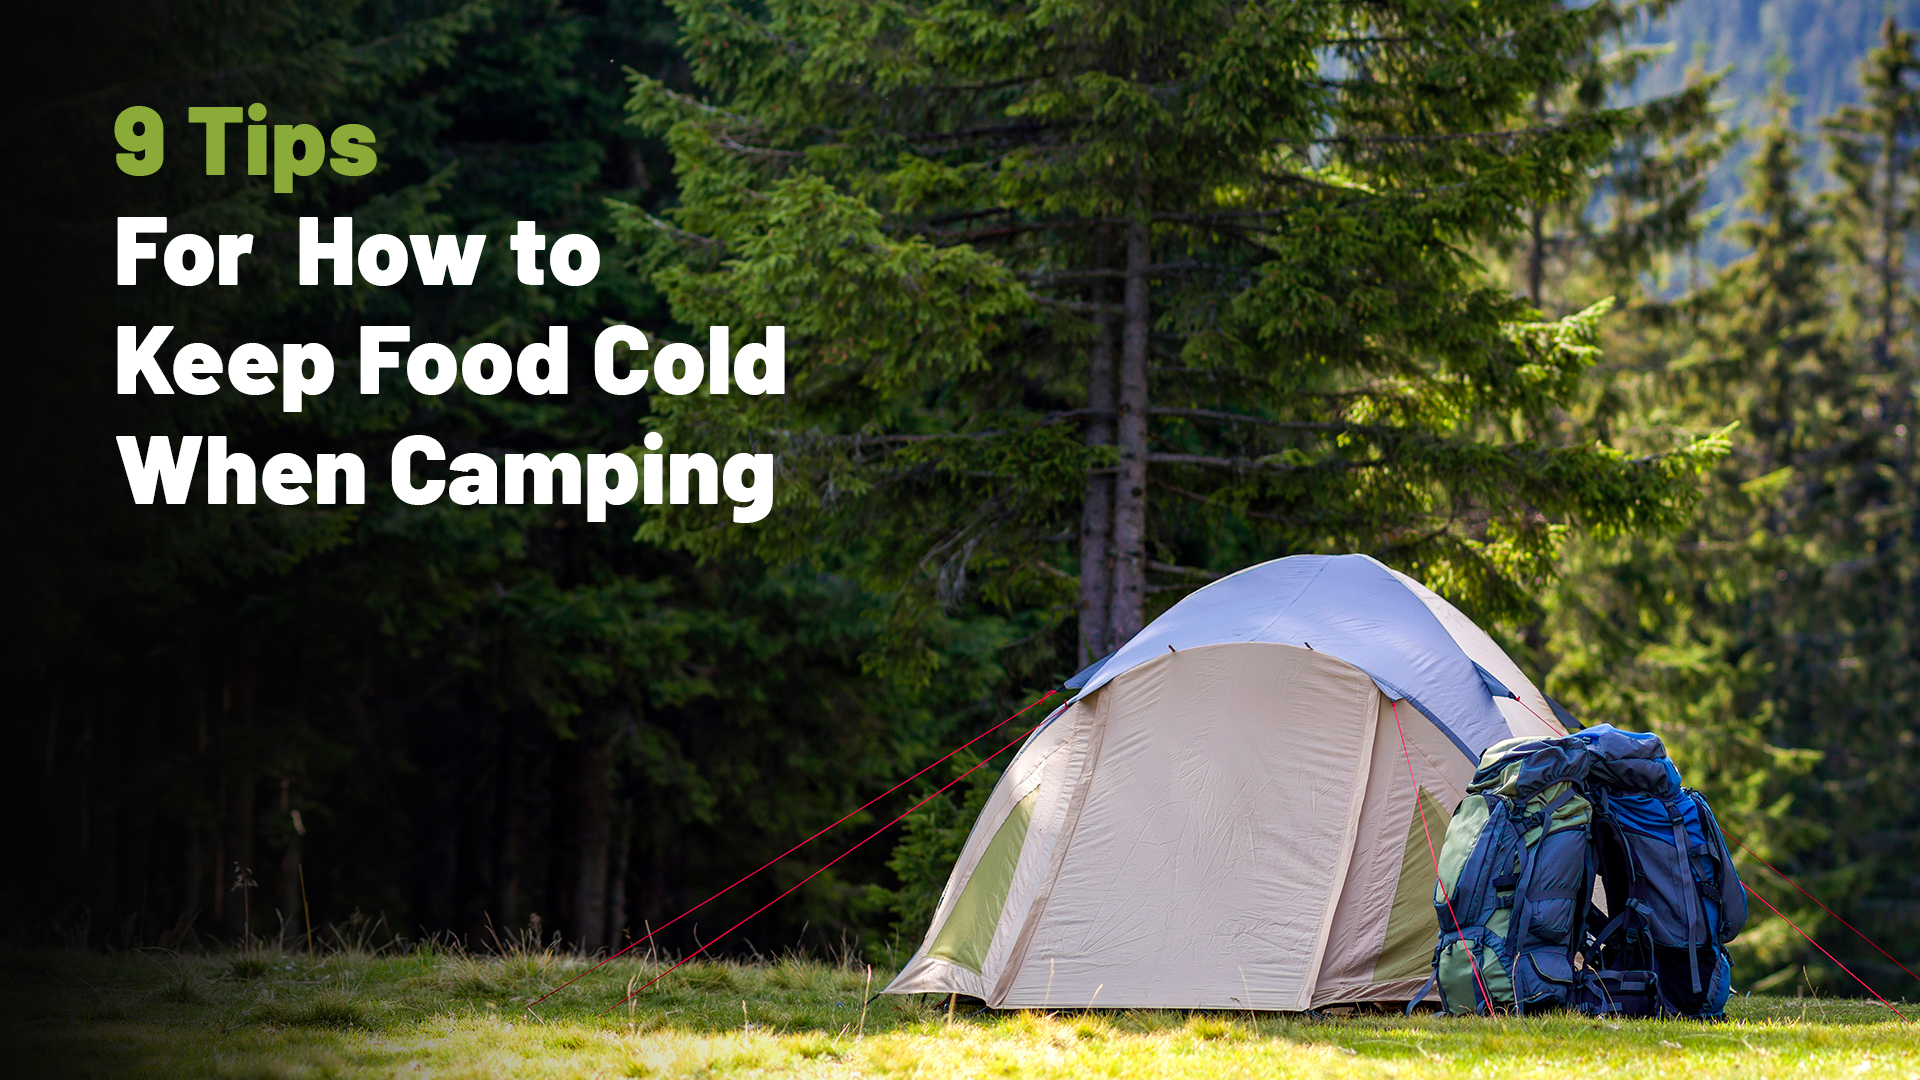 9 Tips For How to Keep Food Cold When Camping